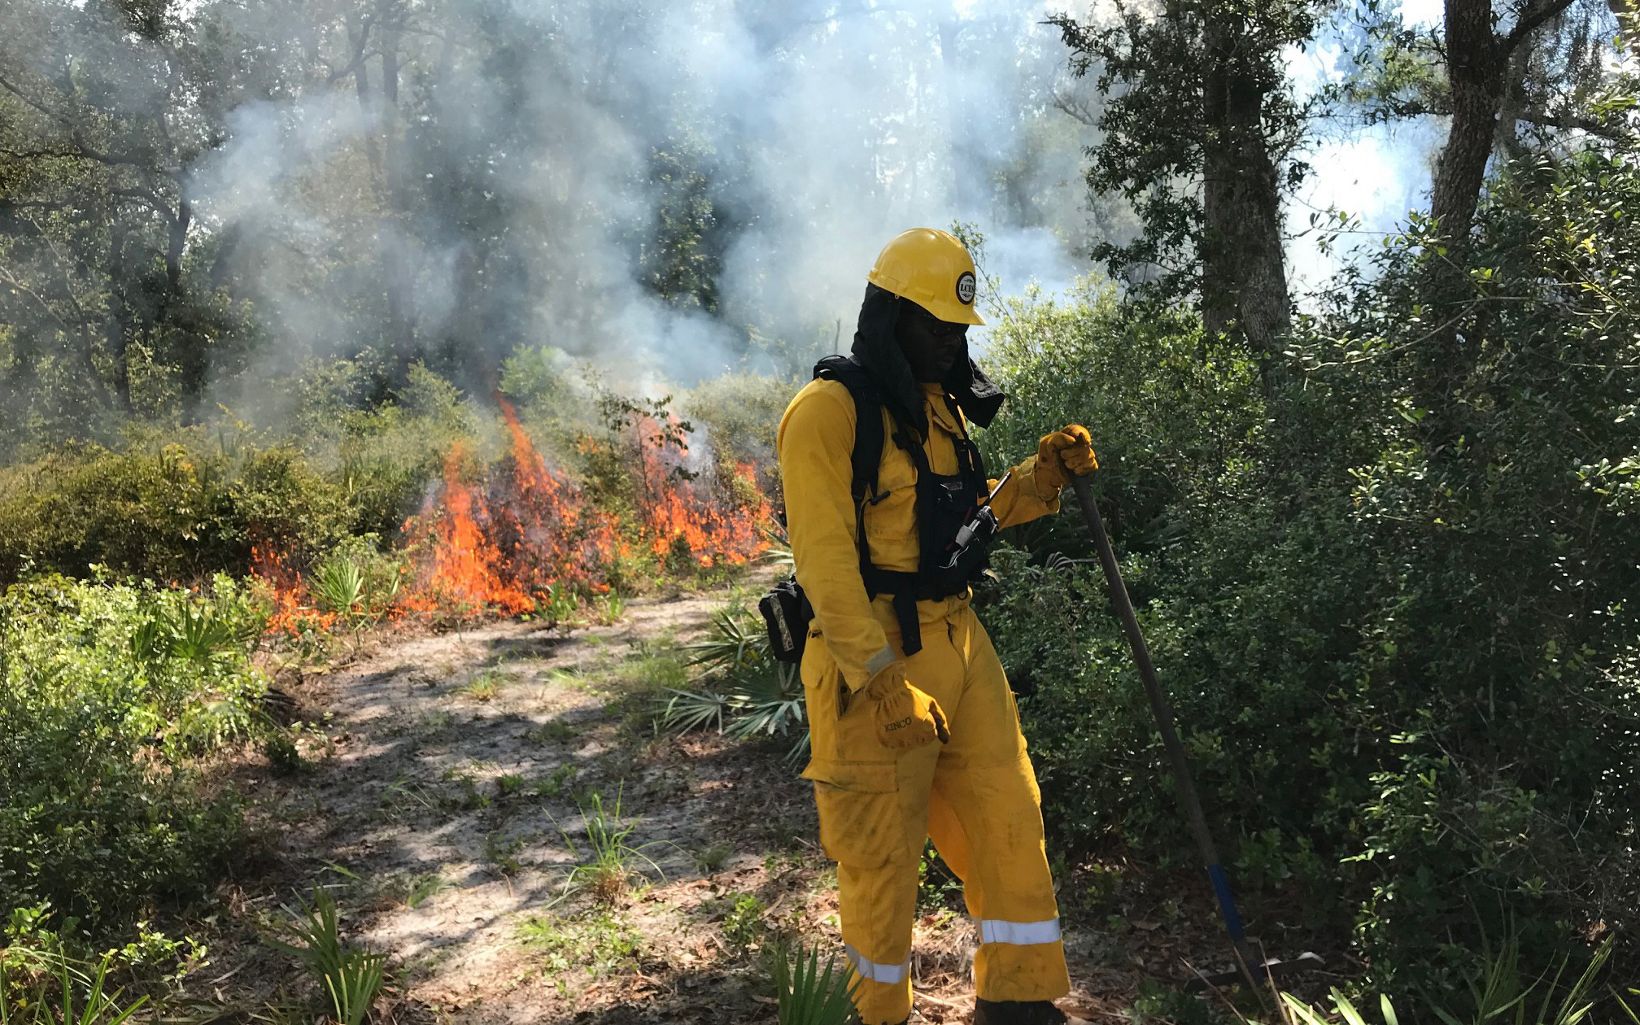 A prescribed fire practitioner from the Bahamas monitors the fire in Florida.